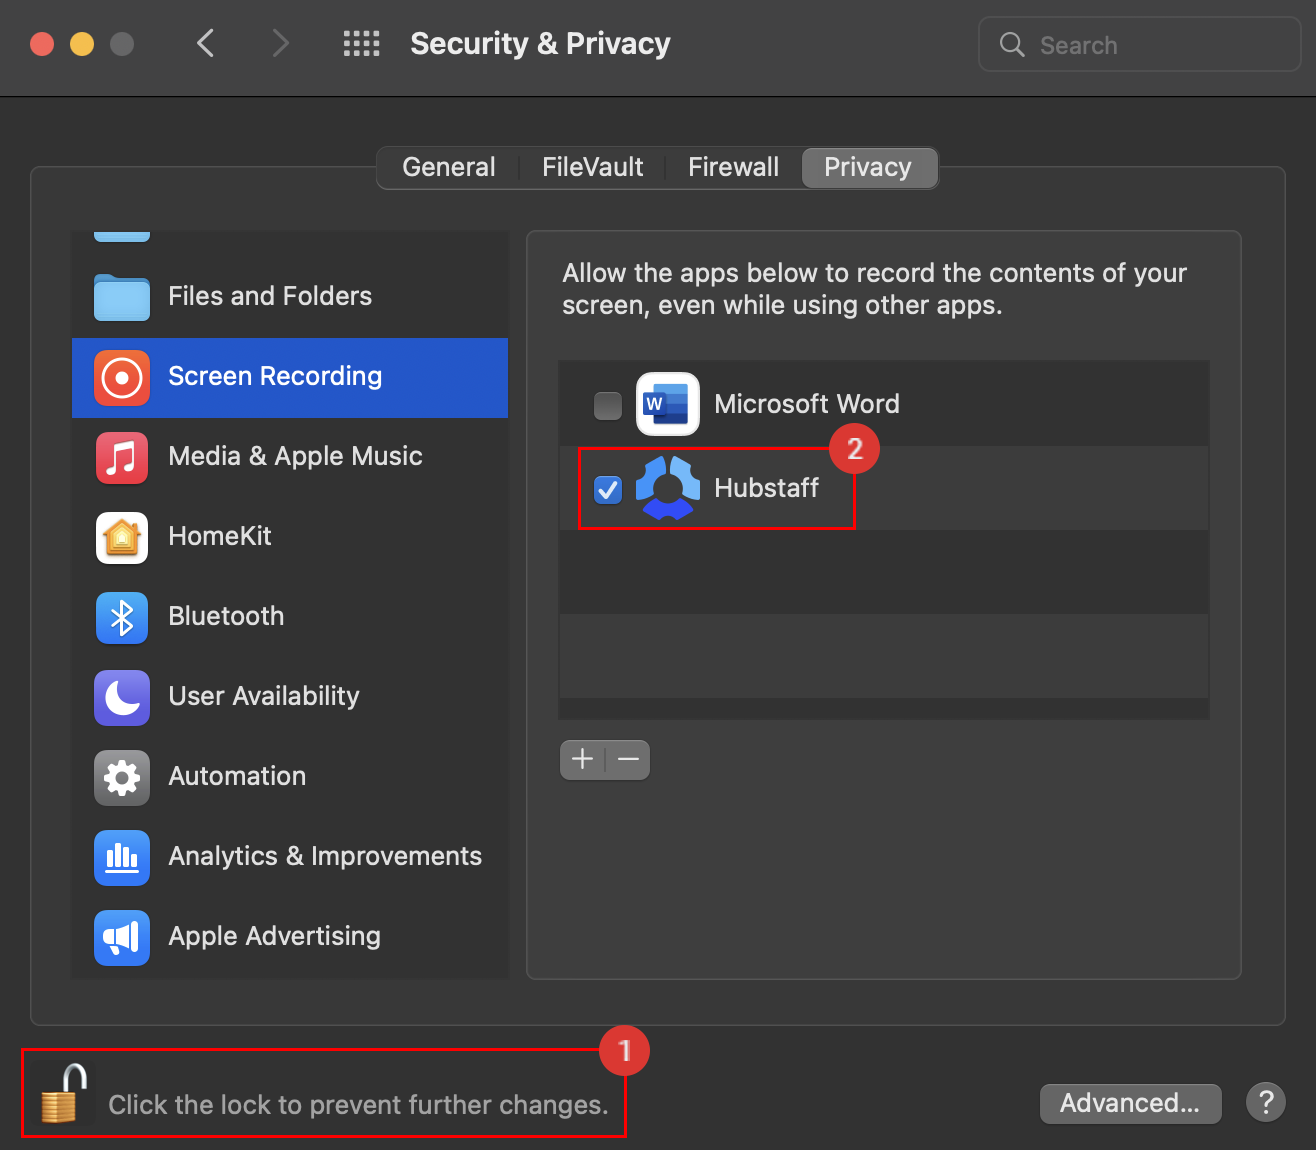 security and privacy settings